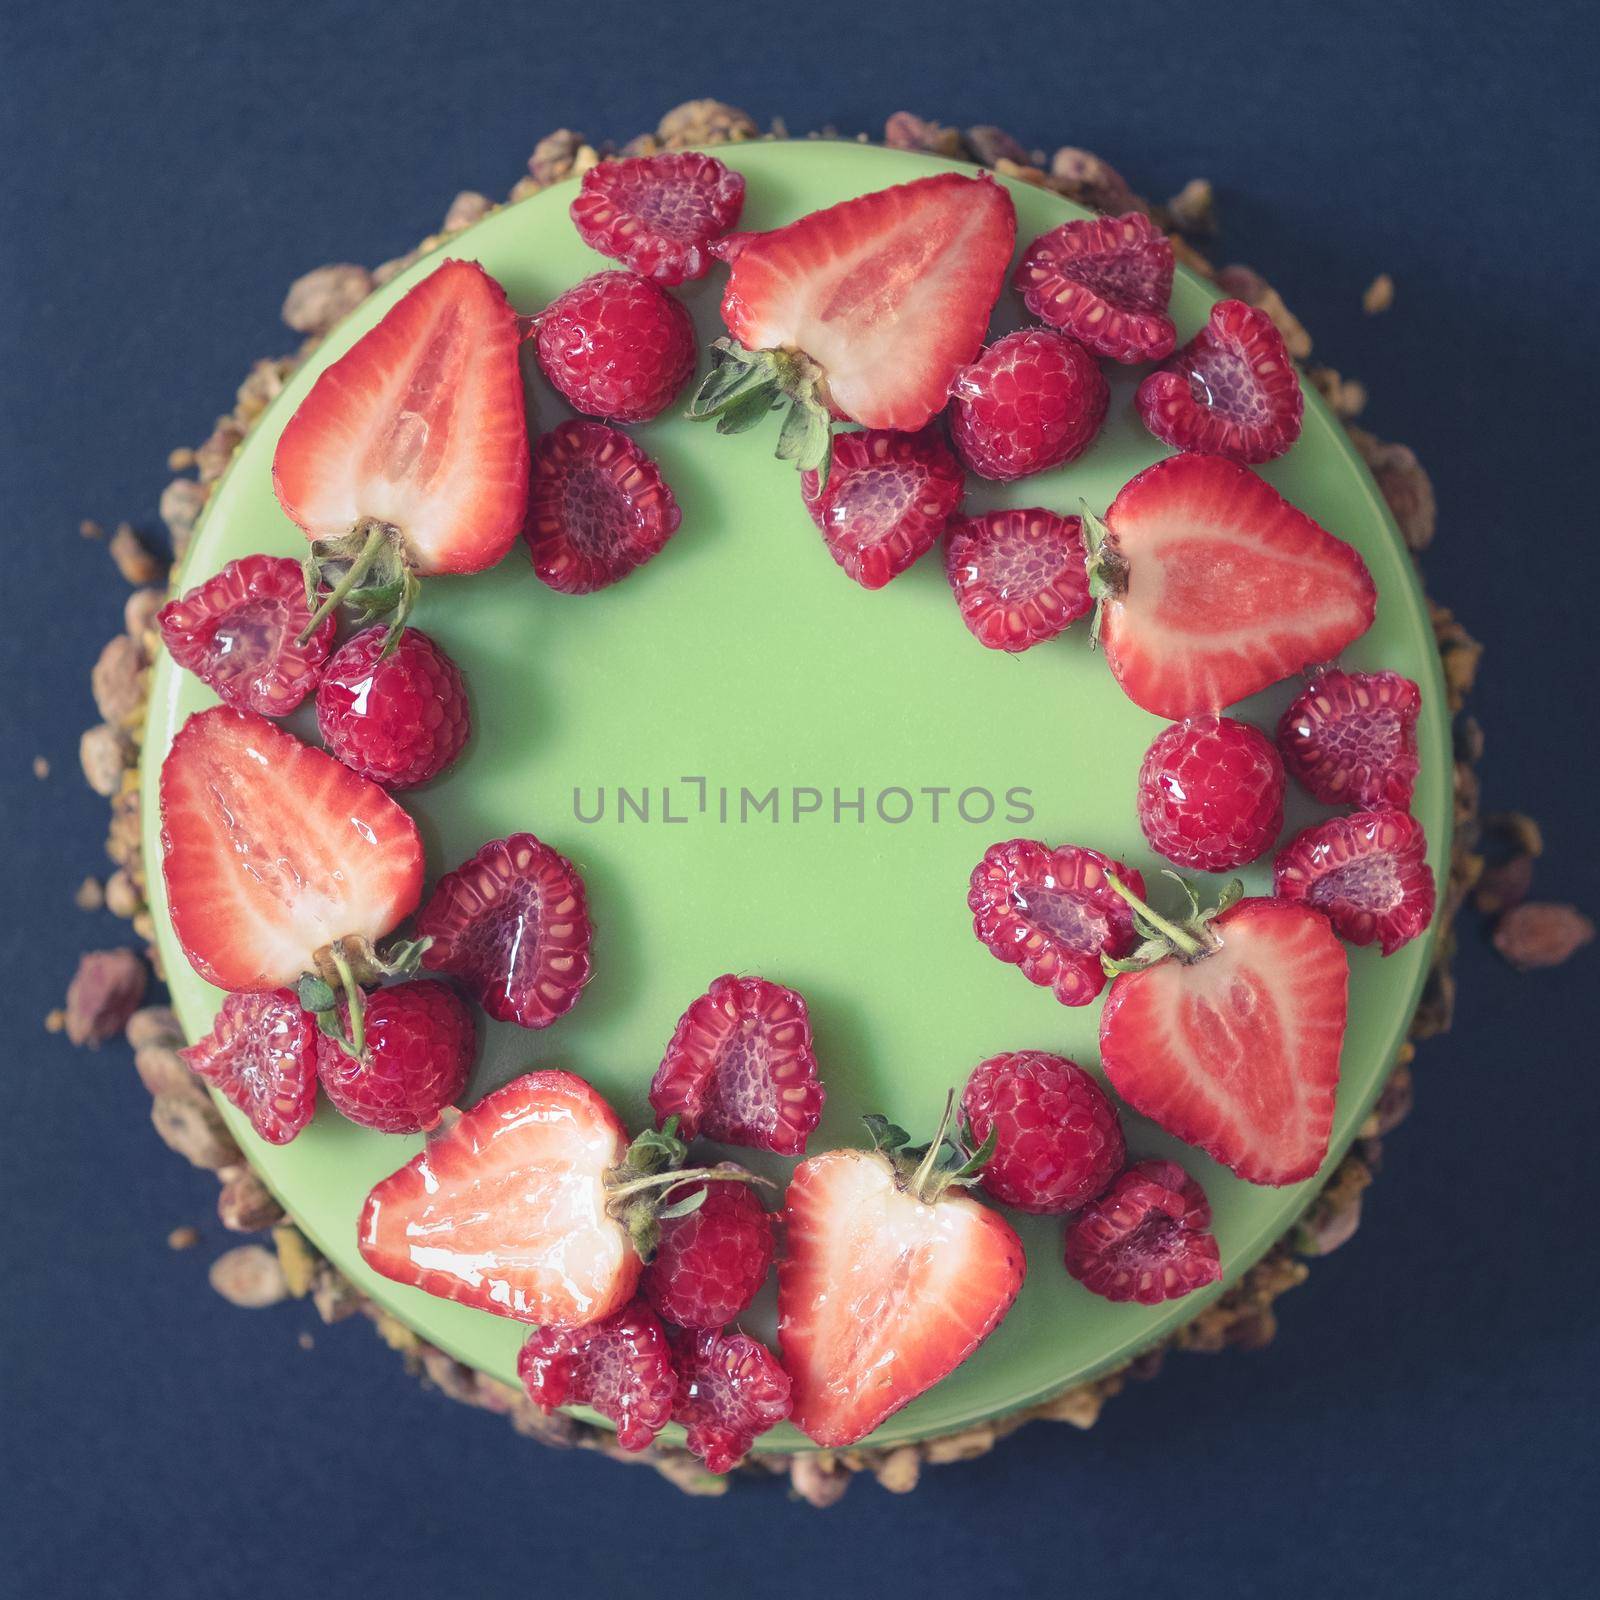 A Beautiful Pistachio Birthday Cake, Topped With Fresh Strawberries And Raspberries